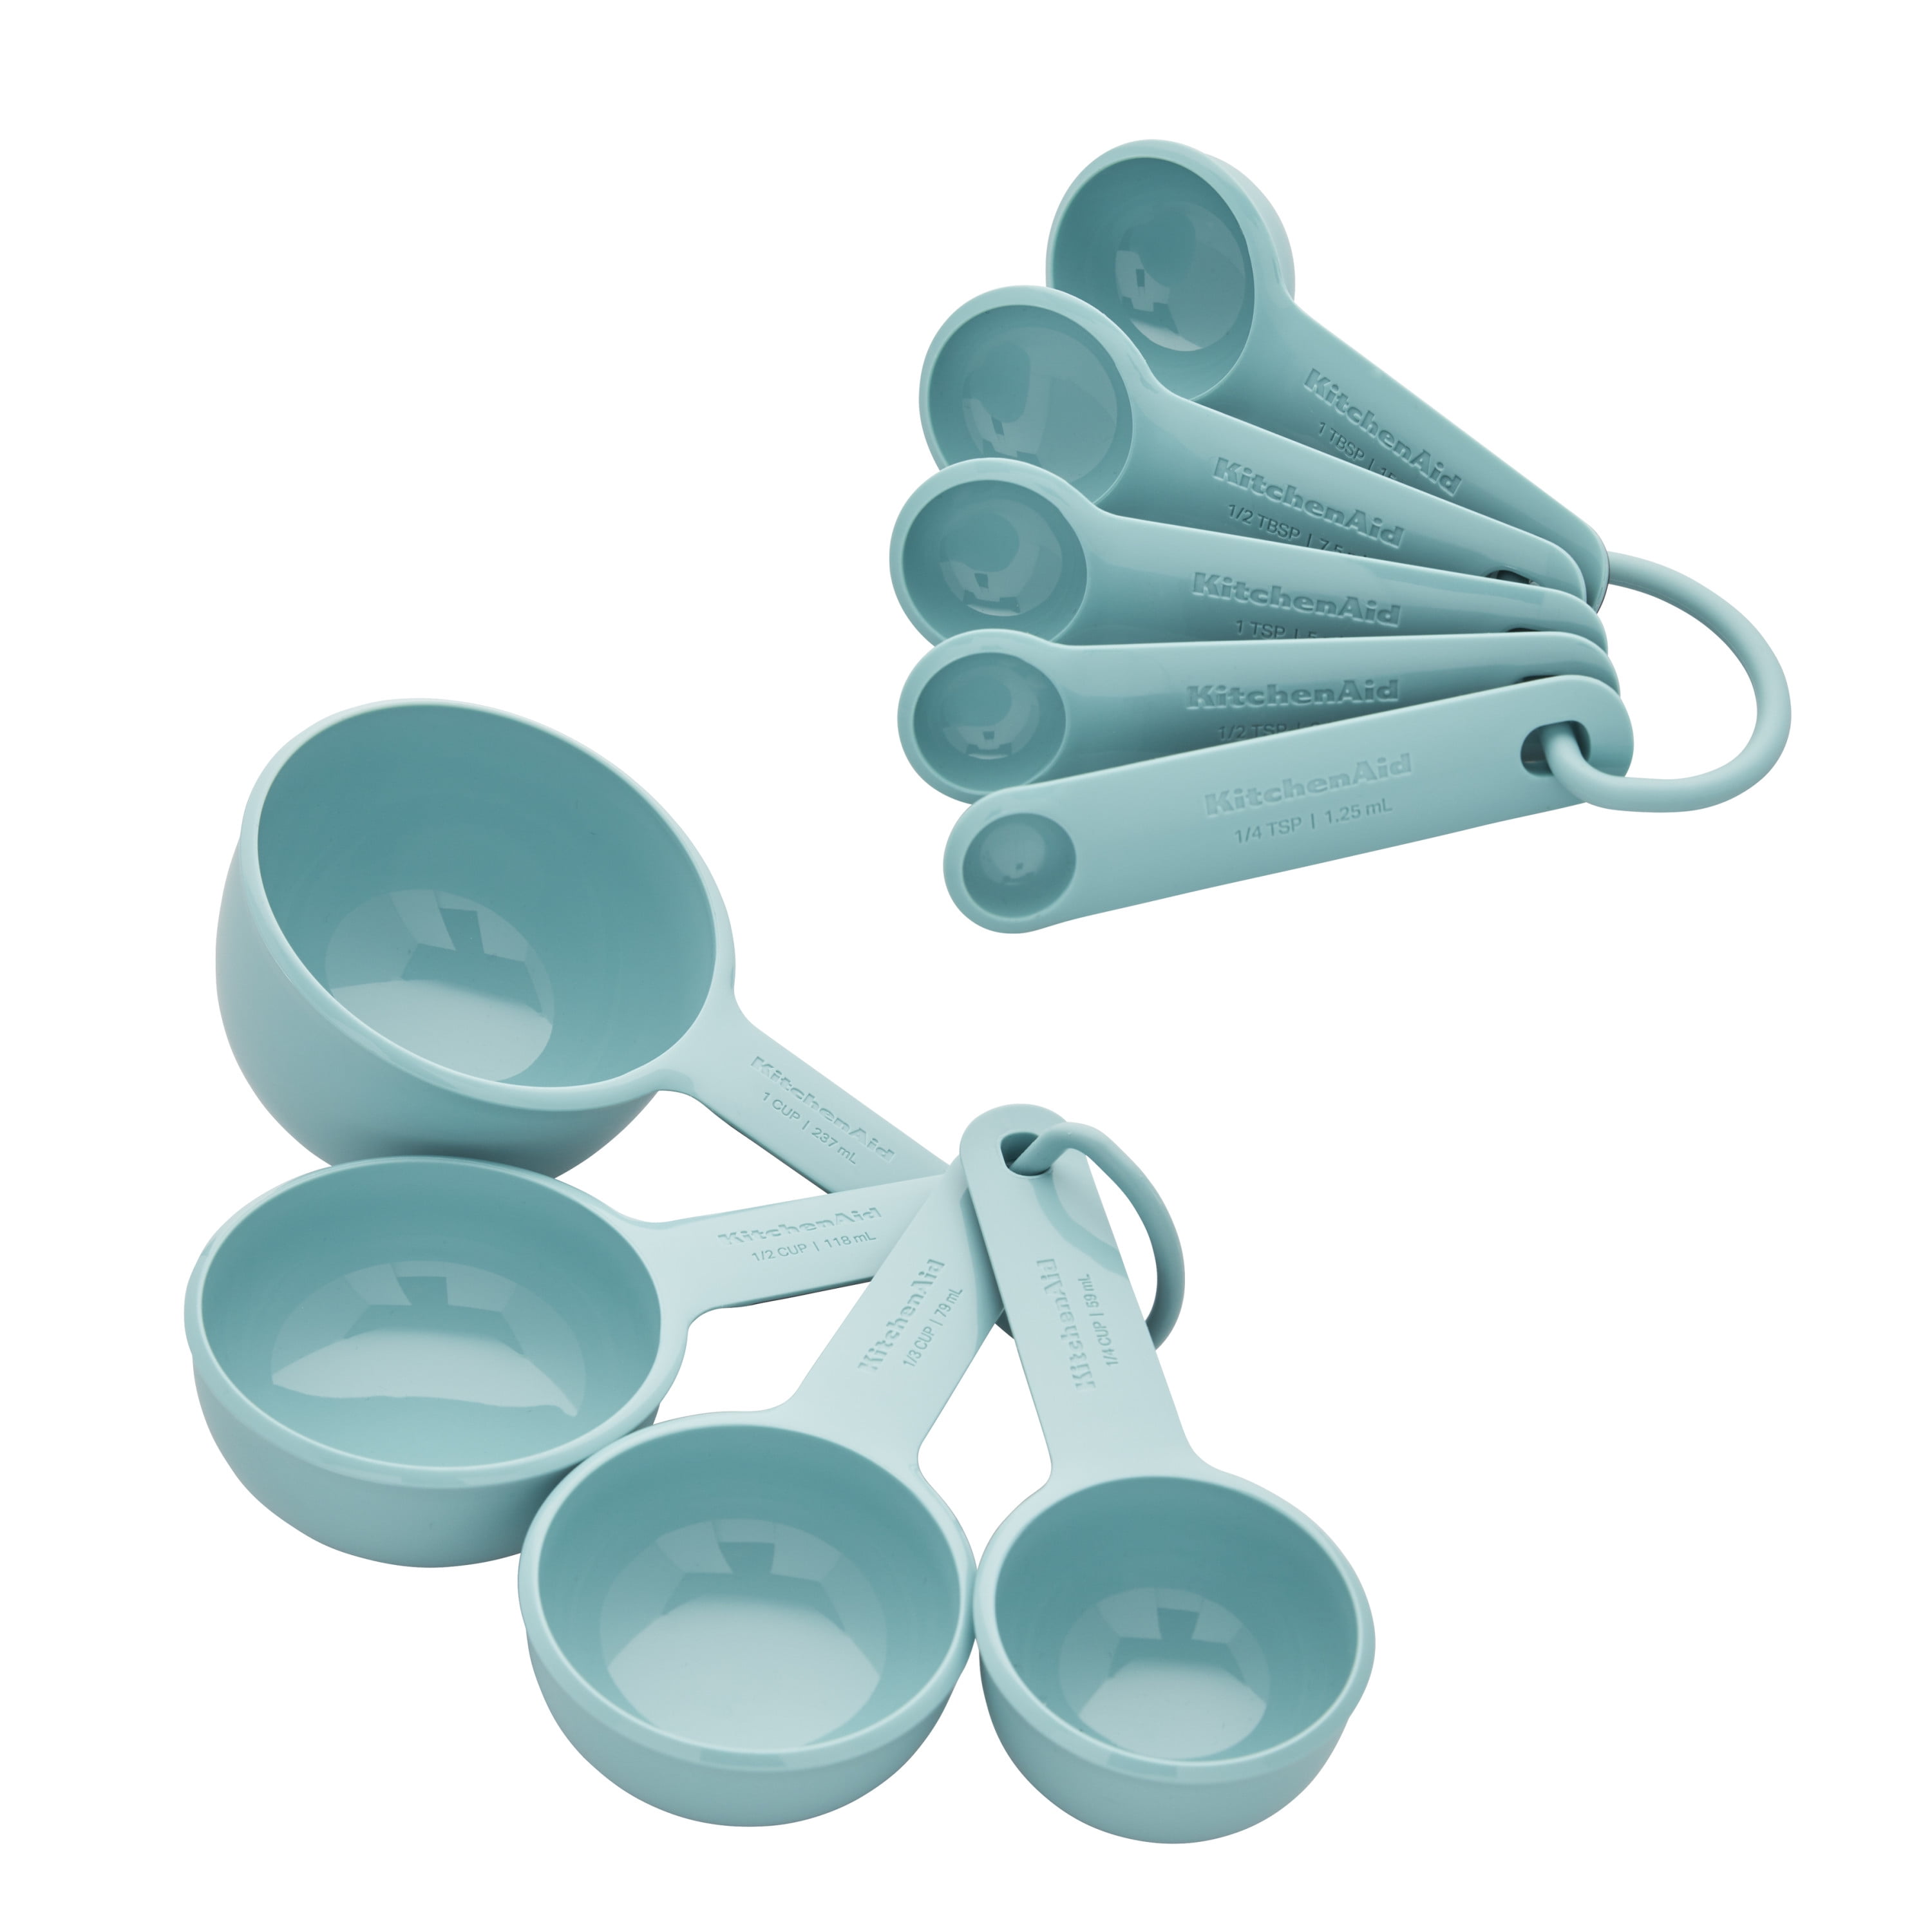 Multi Color KitchenAid Measuring Cups and Spoons Set Pink Blue